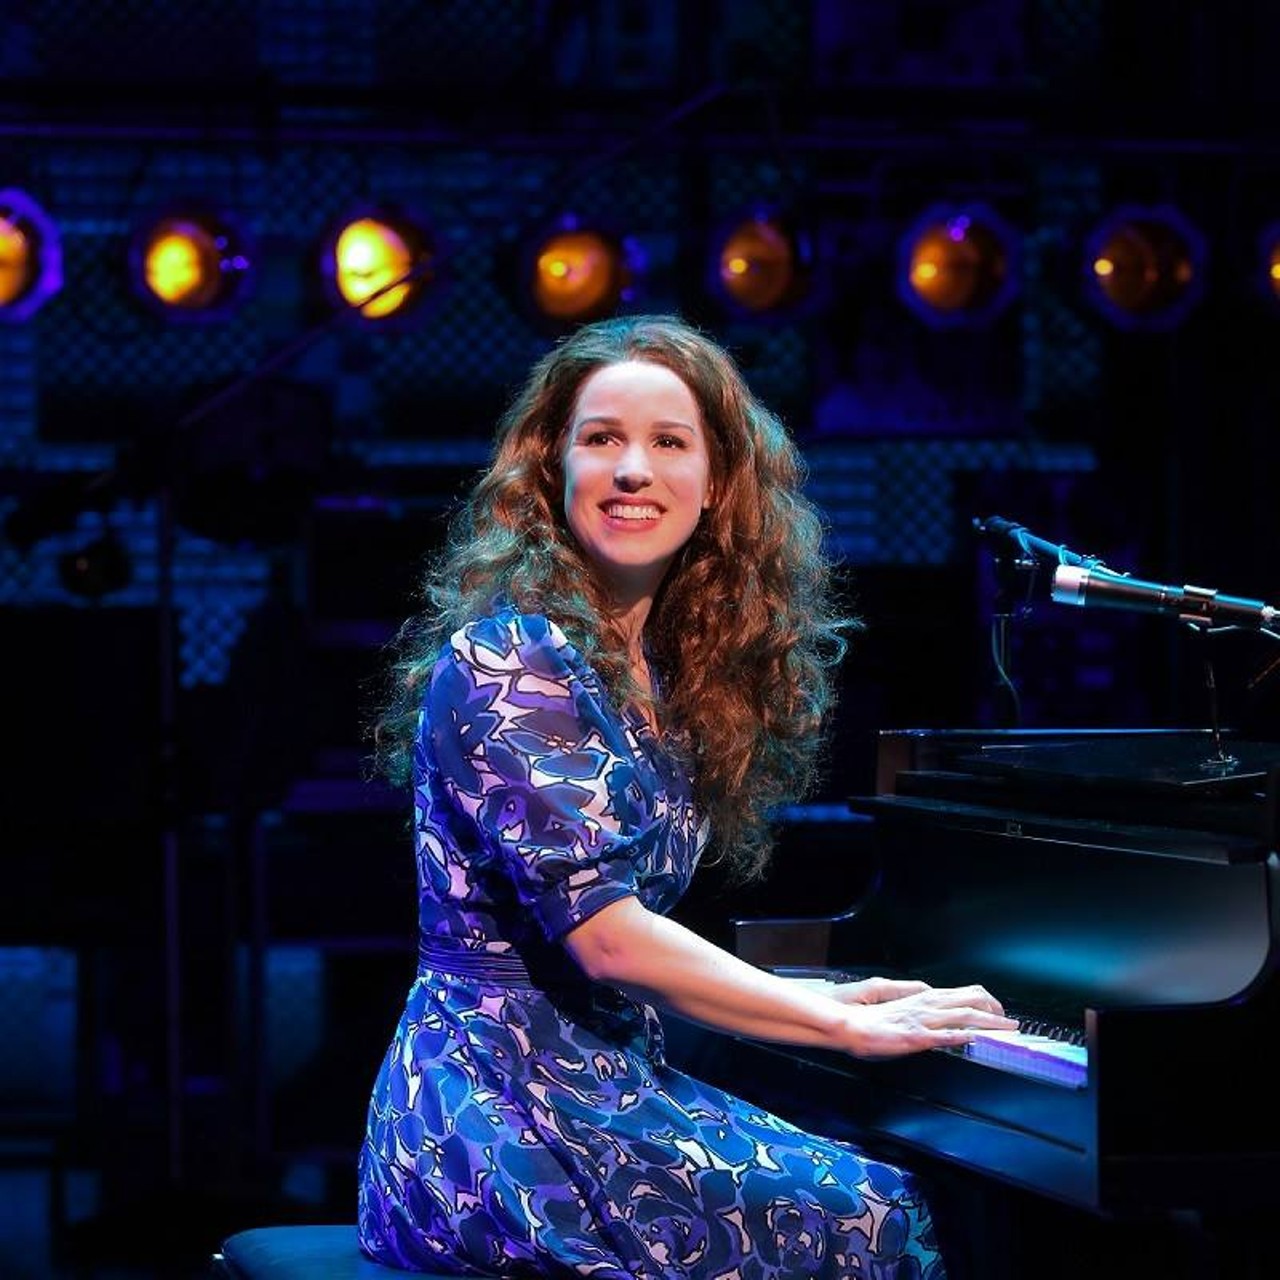 Wed-Tues, 12/14-20
Beautiful: The Carole King Story
@ Fisher Theatre
Carole King penned earworms like &#147;It&#146;s Too Late,&#148; &#147;I Feel the Earth Move,&#148; and interestingly enough &#147;Where You Lead,&#148; which is better known to millennials as the Gilmore Girls theme song. Now, the singer-songwriter&#146;s prolific career is being honored with a musical that tells the story of her journey. It all begins as King professes to her mother her deep desire to move to New York City to sell her songs and traverses the ups and downs of her professional and personal life. The musical includes her songs such as &#147;Pleasant Valley Sunday,&#148; &#147;Happy Days Are Here Again,&#148; &#147;Some Kind of Wonderful,&#148; and &#147;So Far Away.&#148;
Shows start at 8 p.m. Monday-Saturday, 6:30 p.m. on Sundays with matinees at 2 p.m. on Saturday and 1 p.m. on Sunday, Tuesday, and Wednesday; 3011 W. Grand Blvd., Detroit; 313-872-1000; broadwayindetroit.com; tickets start at $44.